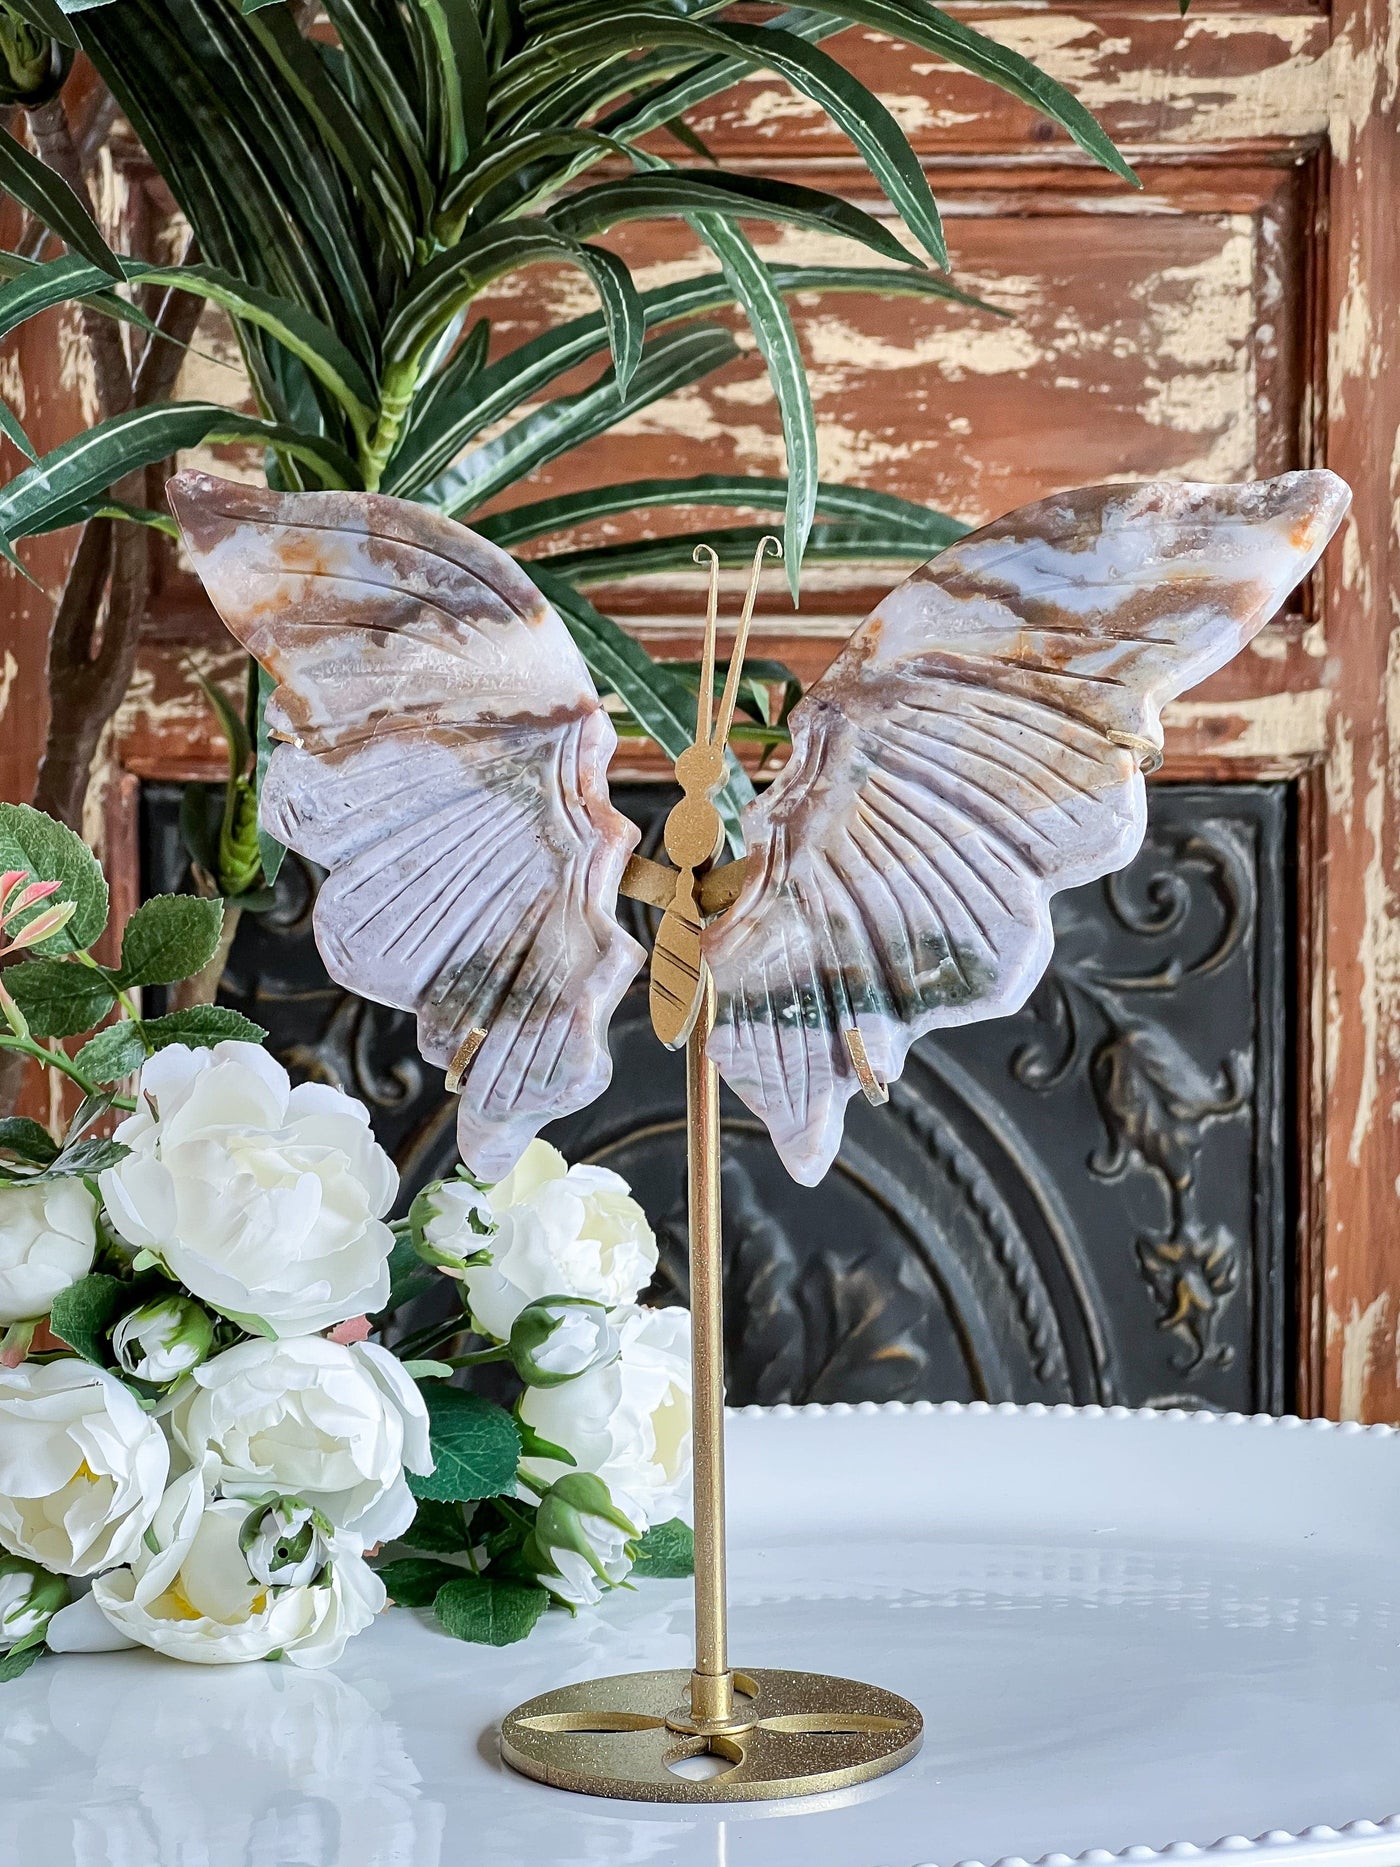 OCEAN JASPER WINGS ON SHIMMERY STAND (MEDIUM) Revive In Style Vintage Furniture Painted Refinished Redesign Beautiful One of a Kind Artistic Antique Unique Home Decor Interior Design French Country Shabby Chic Cottage Farmhouse Grandmillenial Coastal Chalk Paint Metallic Glam Eclectic Quality Dovetailed Rustic Furniture Painter Pinterest Bedroom Living Room Entryway Kitchen Home Trends House Styles Decorating ideas